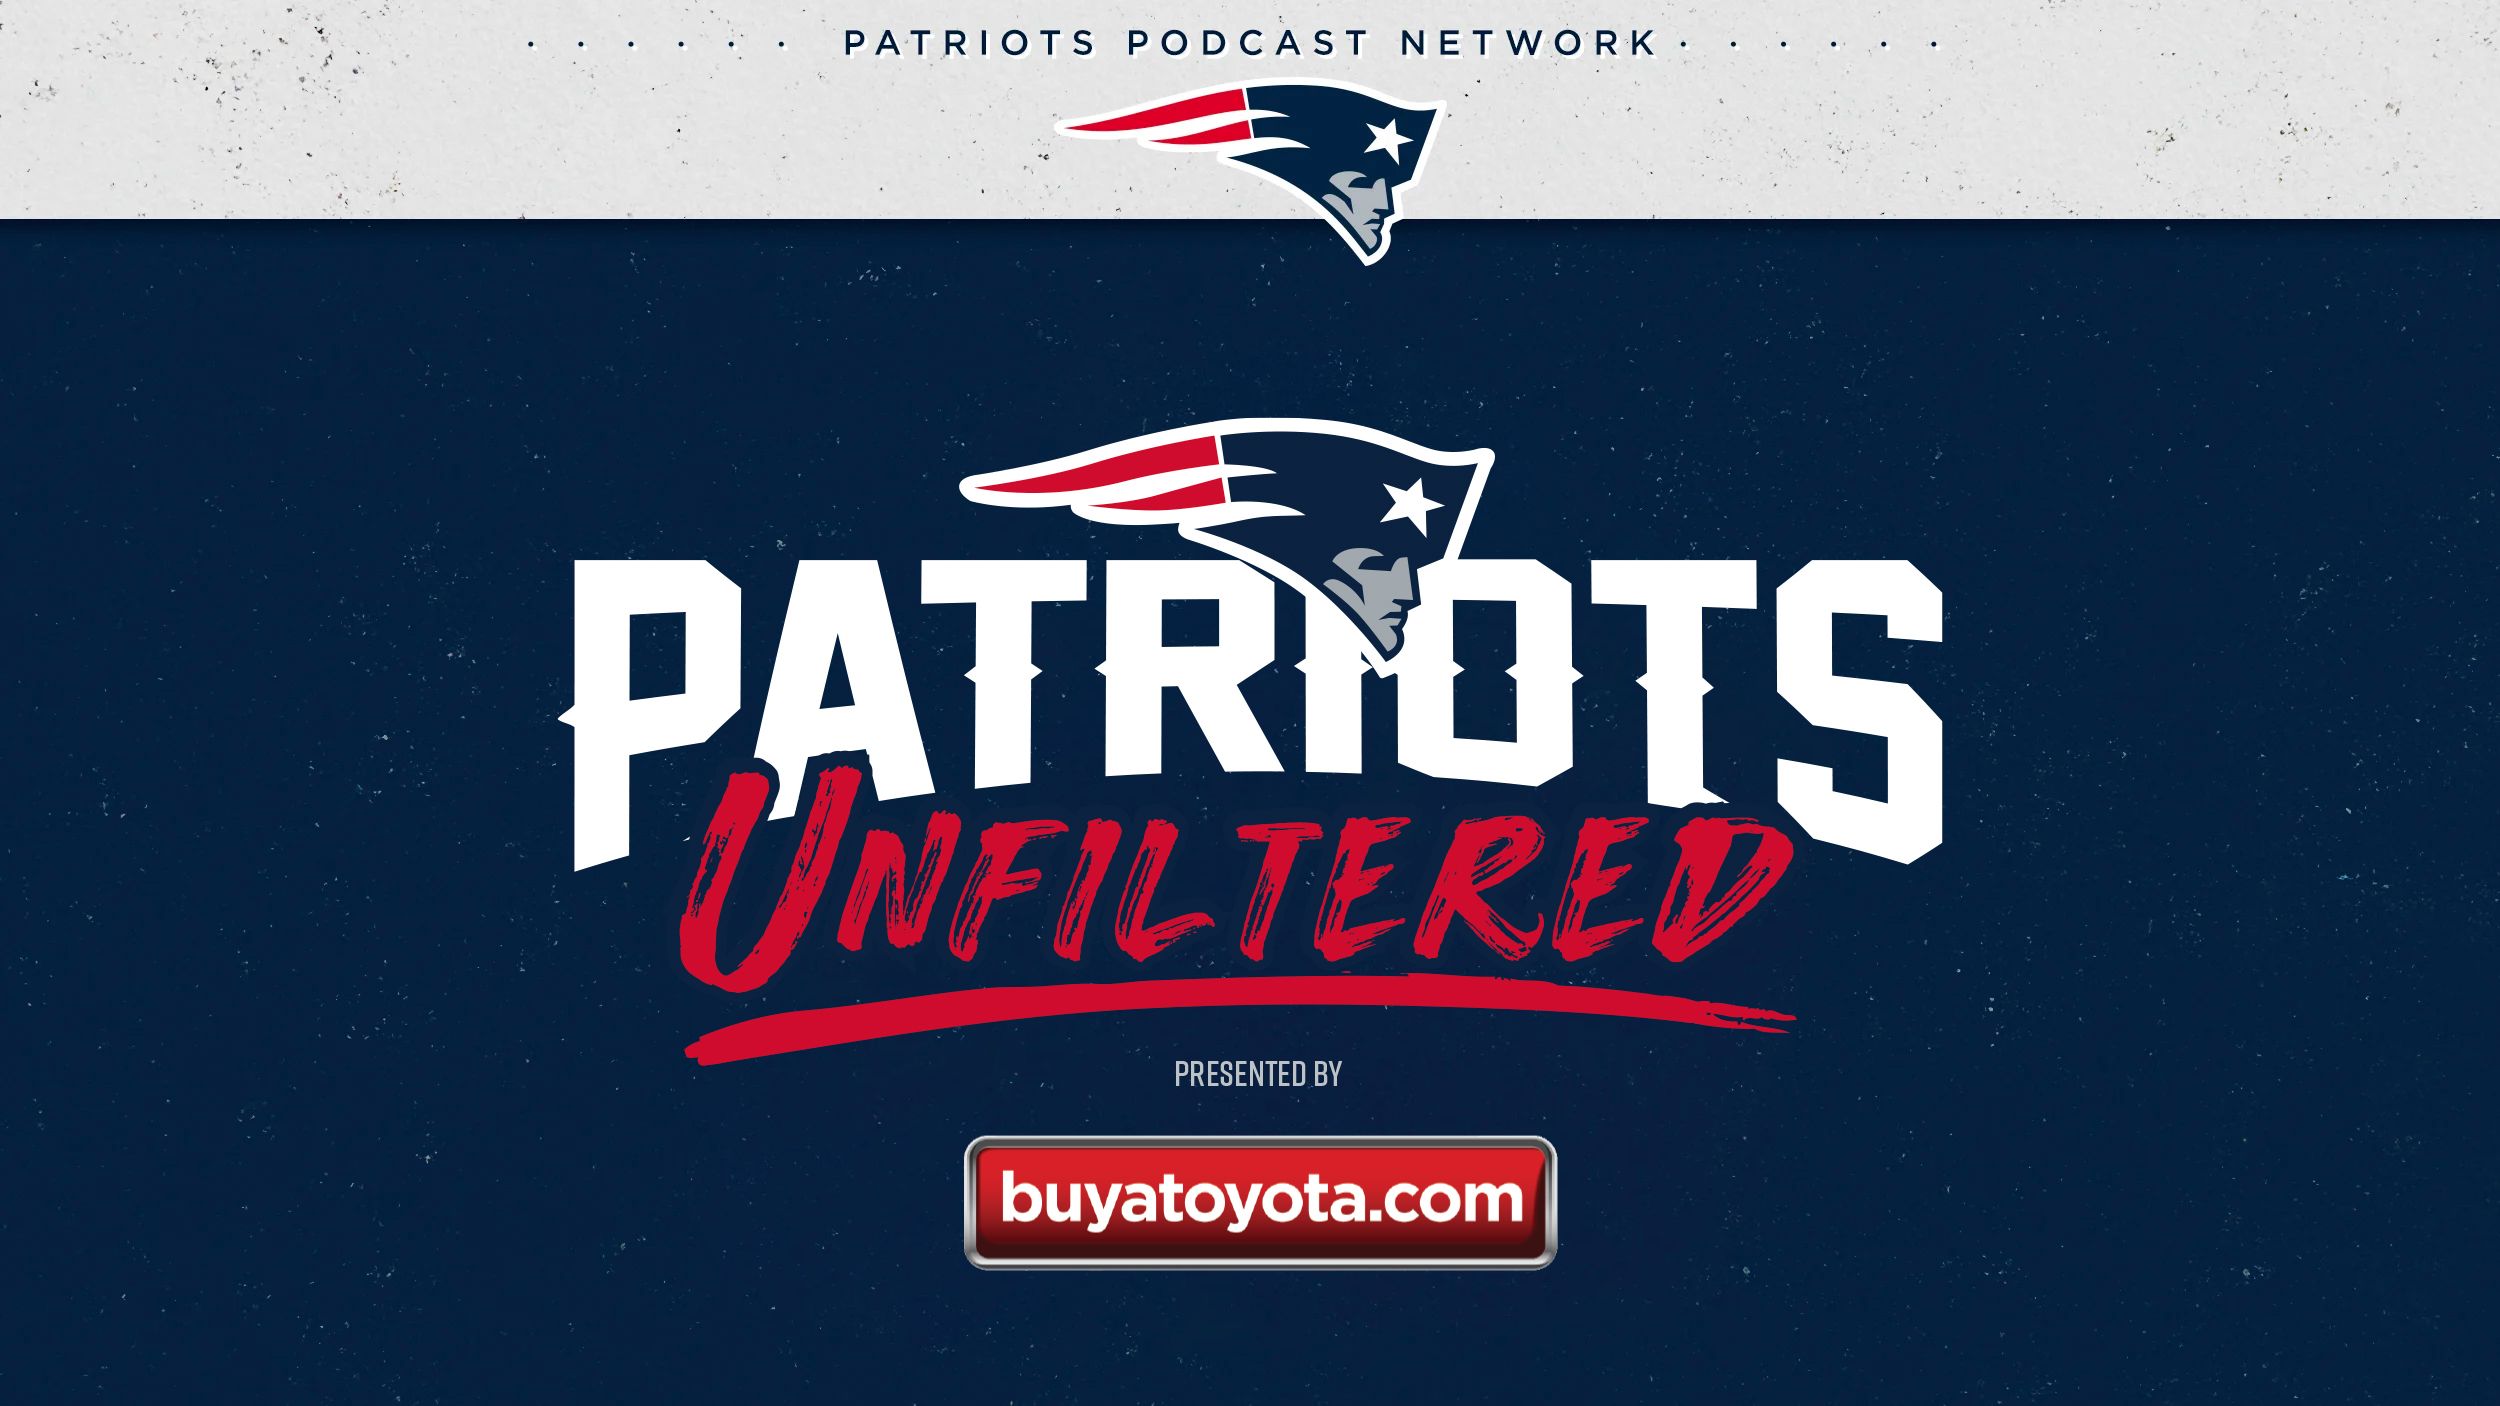 Official Podcasts of the New England Patriots